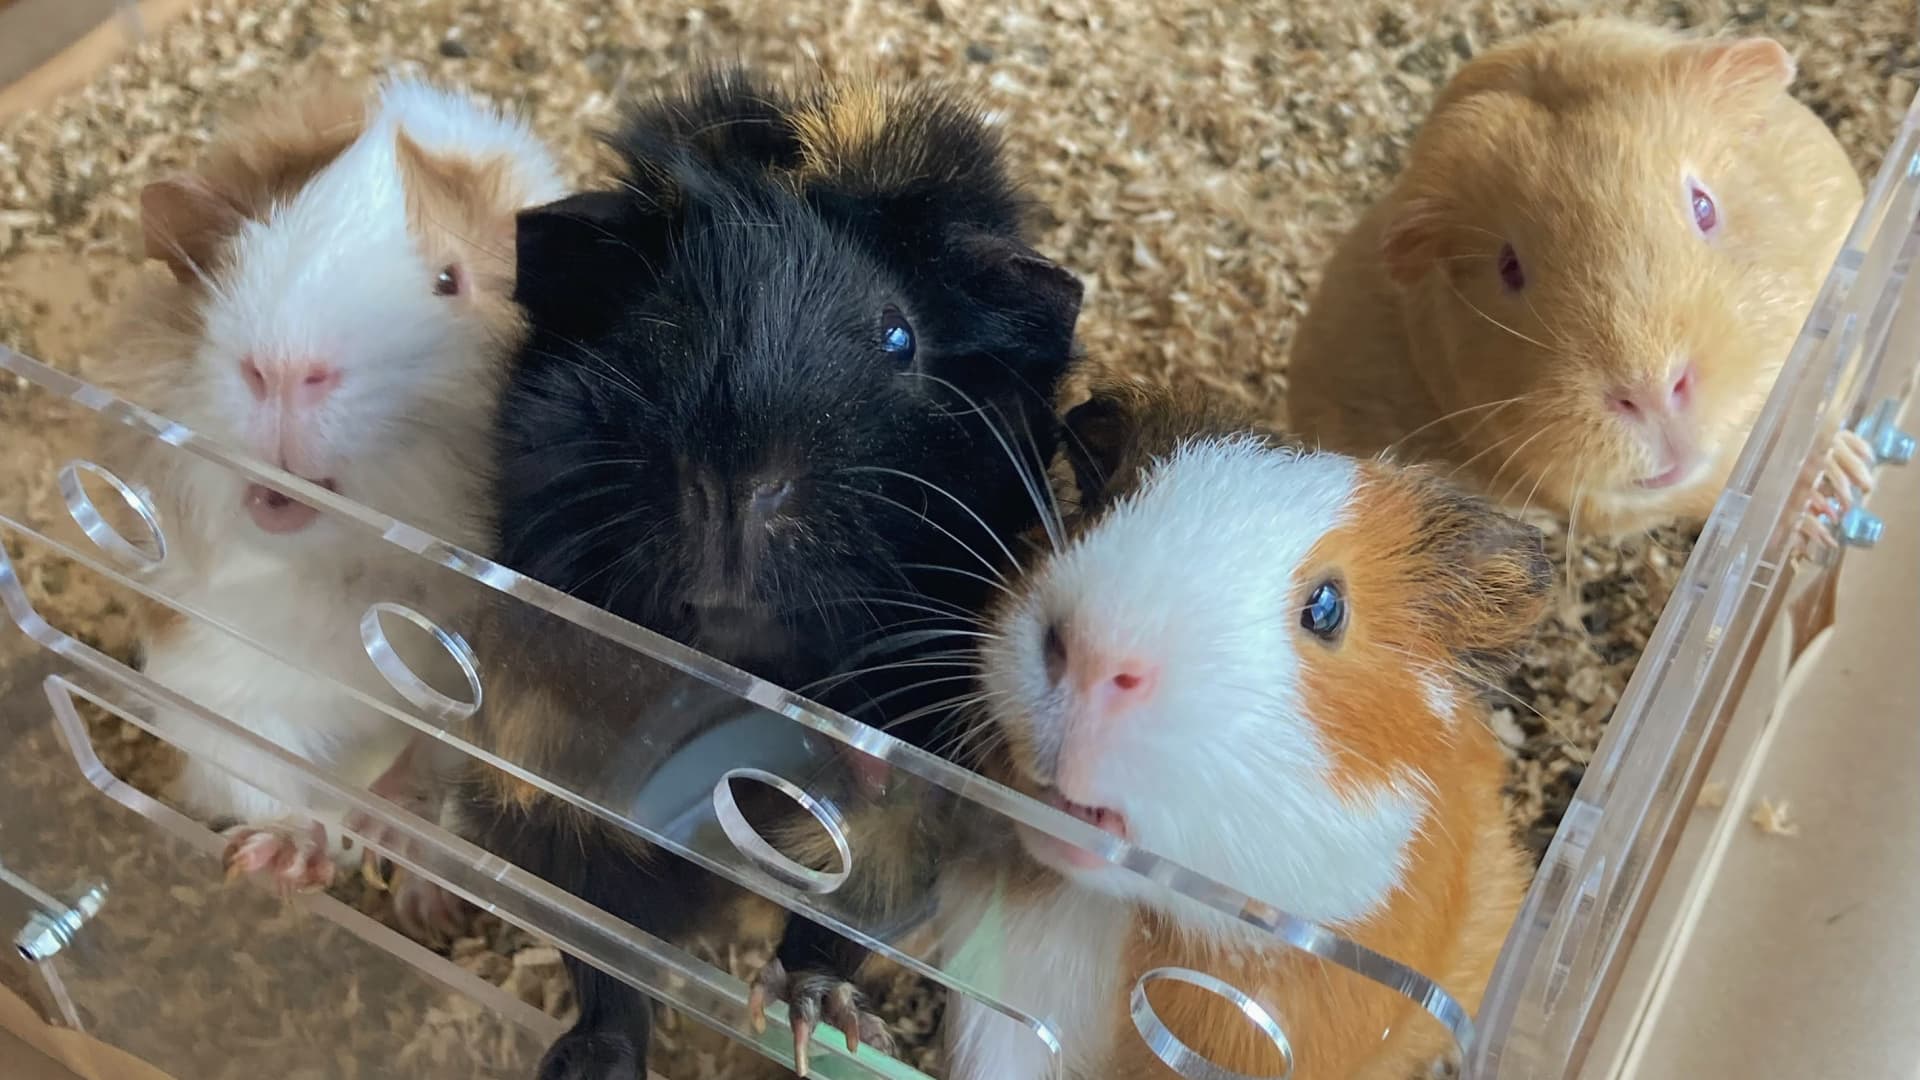 Lin has owned guinea pigs for years, and has kept up to 10 at one time, she says.